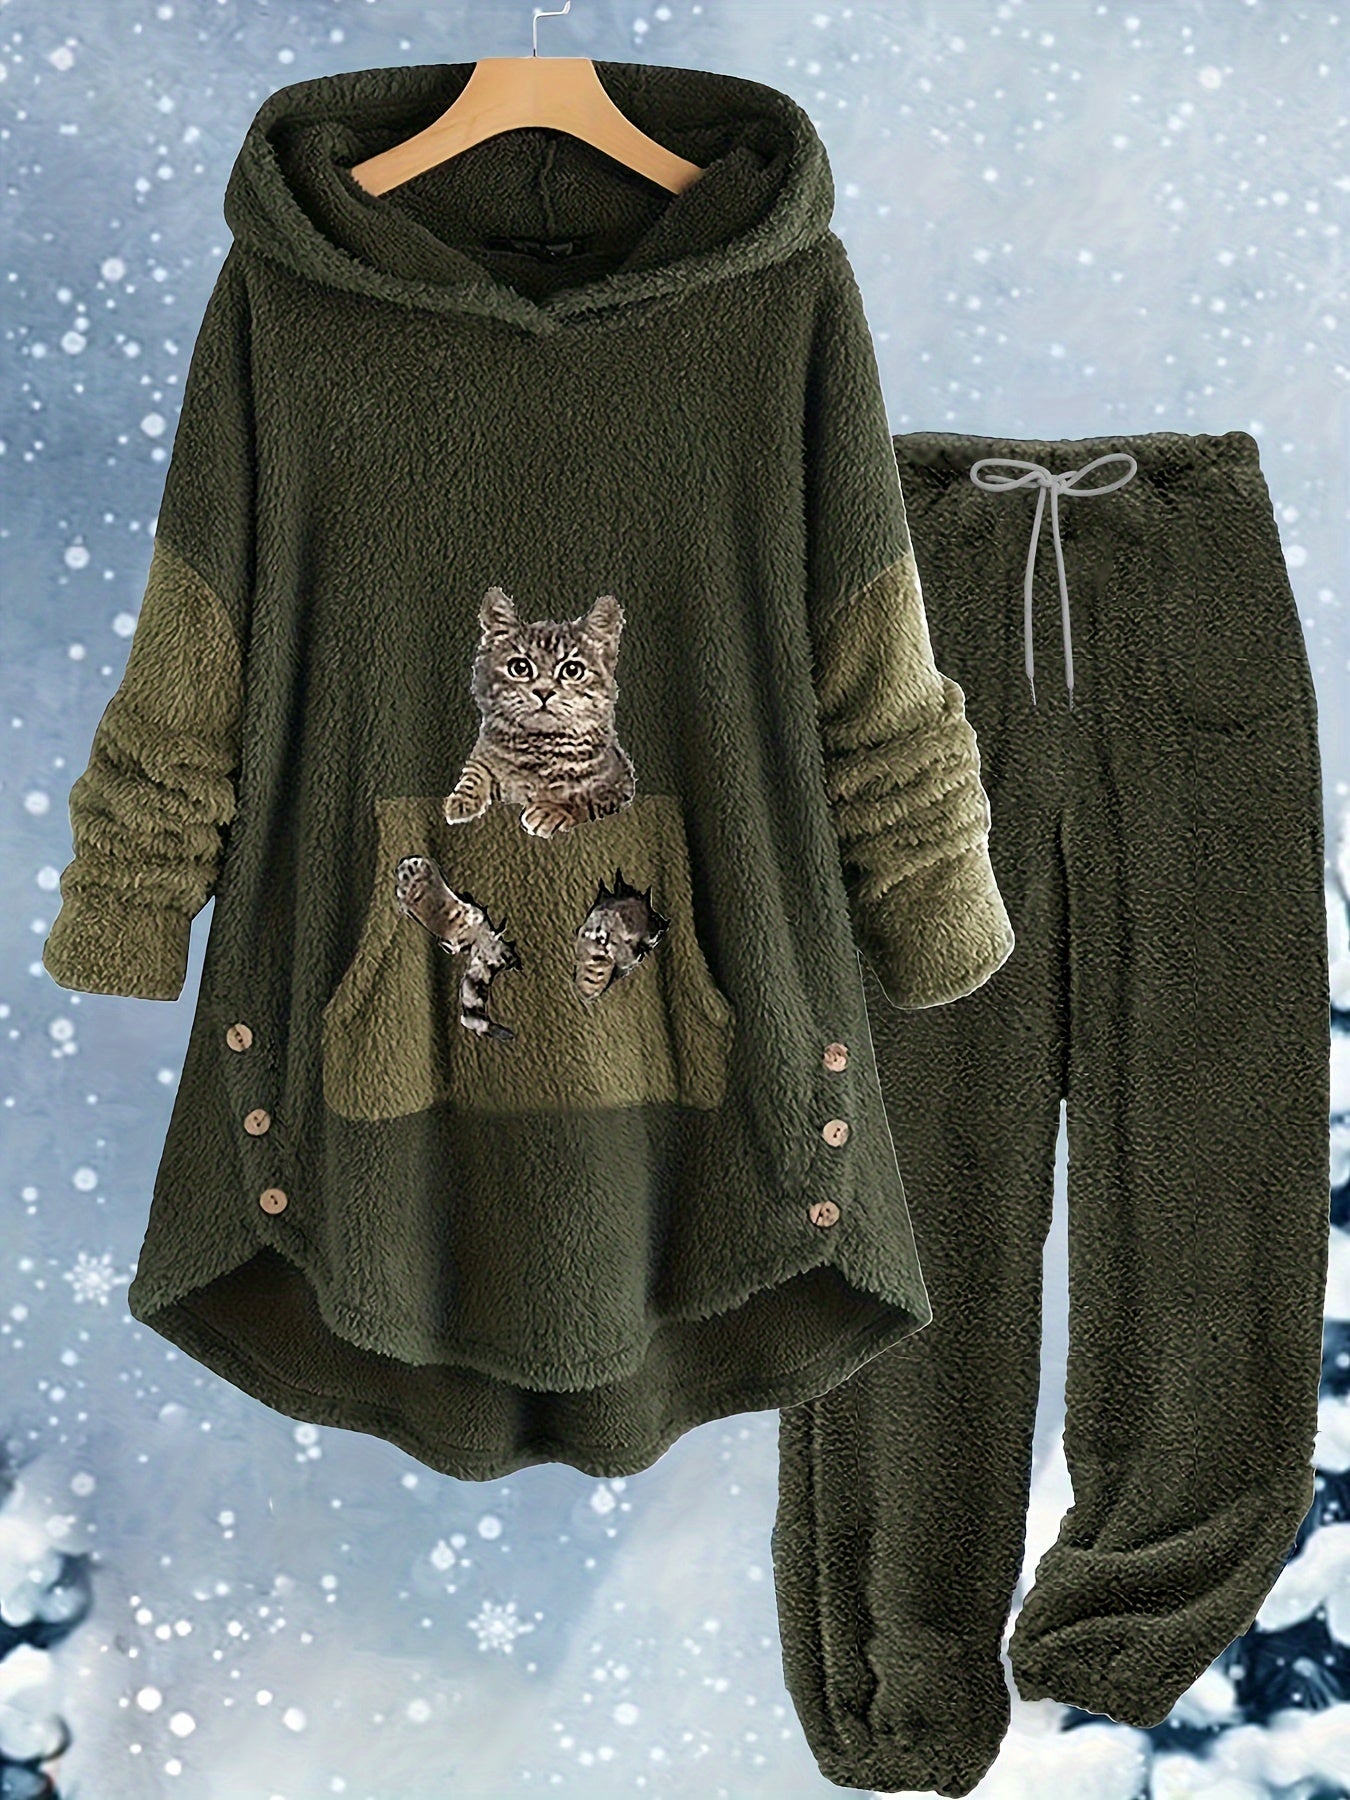 Casual Teddy Two-piece Set, Cute Cat Pattern Hooded Tops & Drawstring Warm Pants Outfits, Women's Clothing